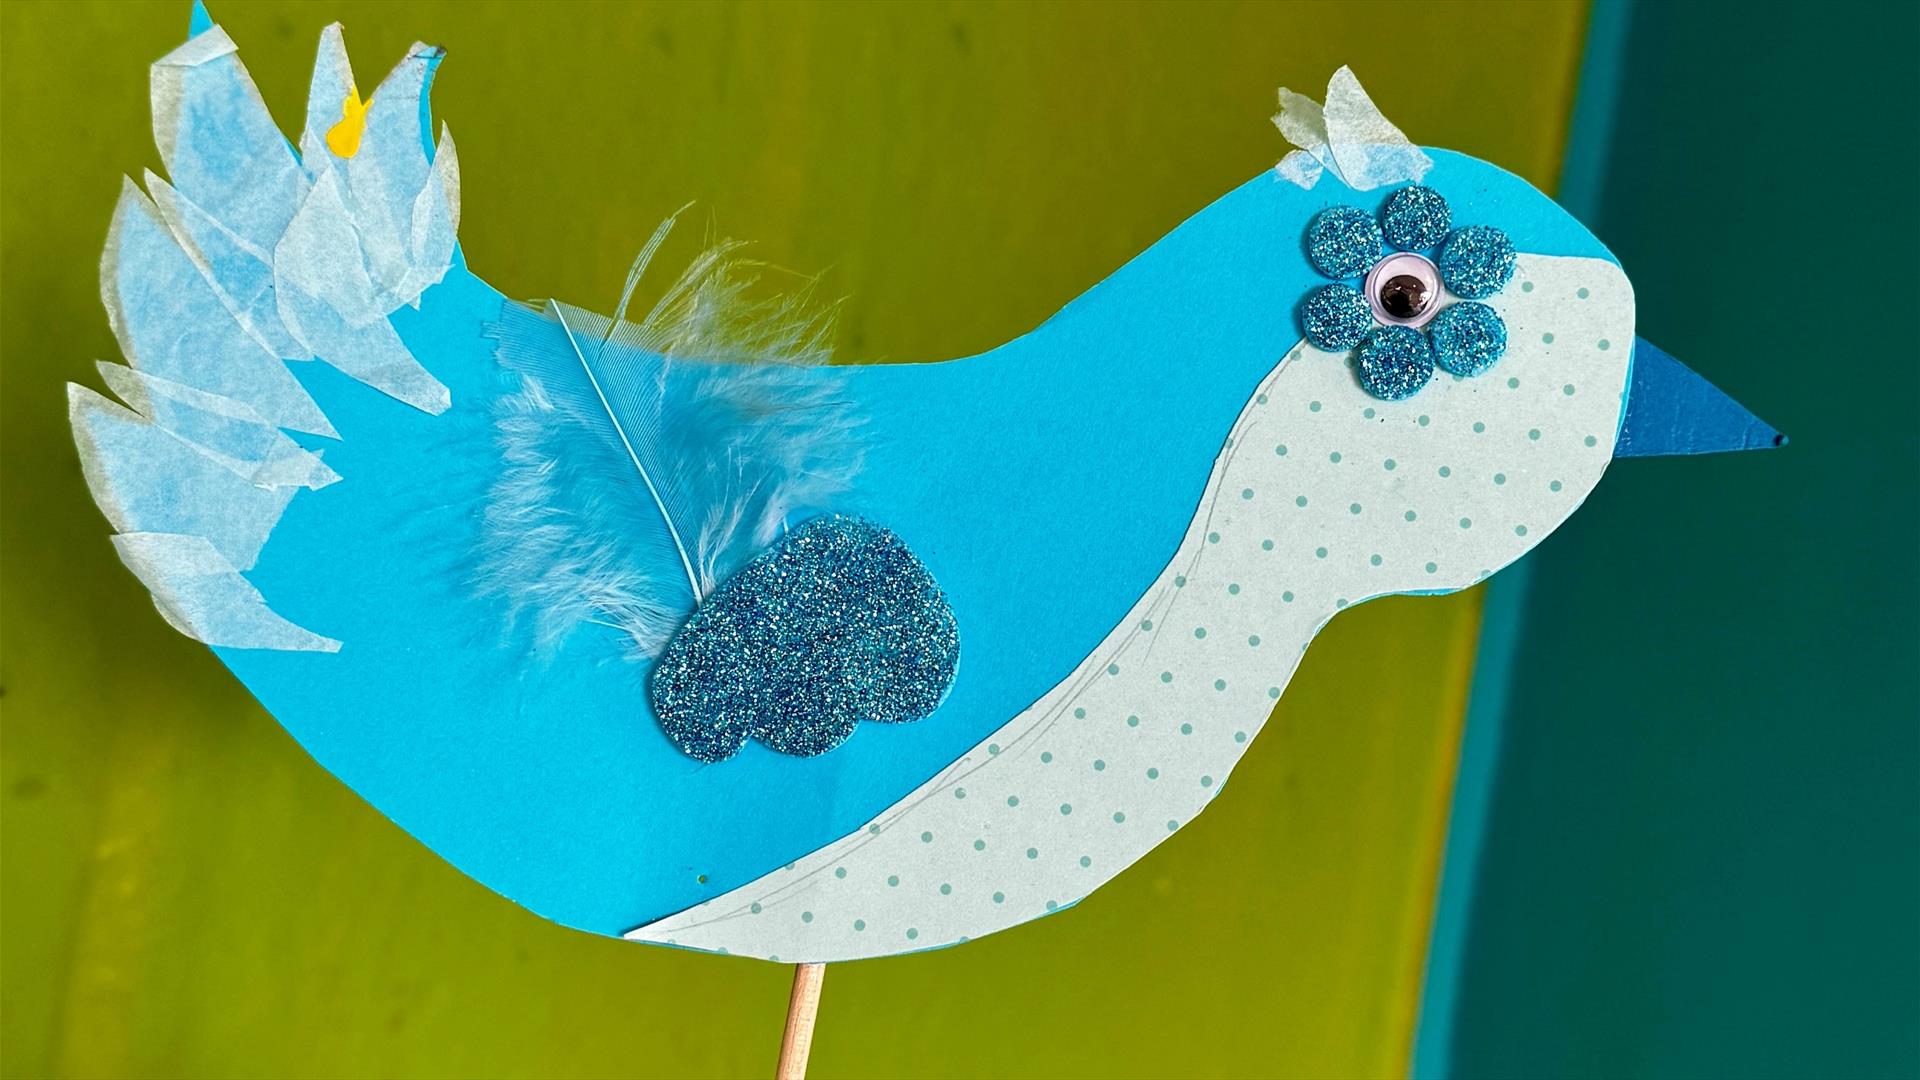 Collage bird made from card, tissue paper, feathers and other craft materials.